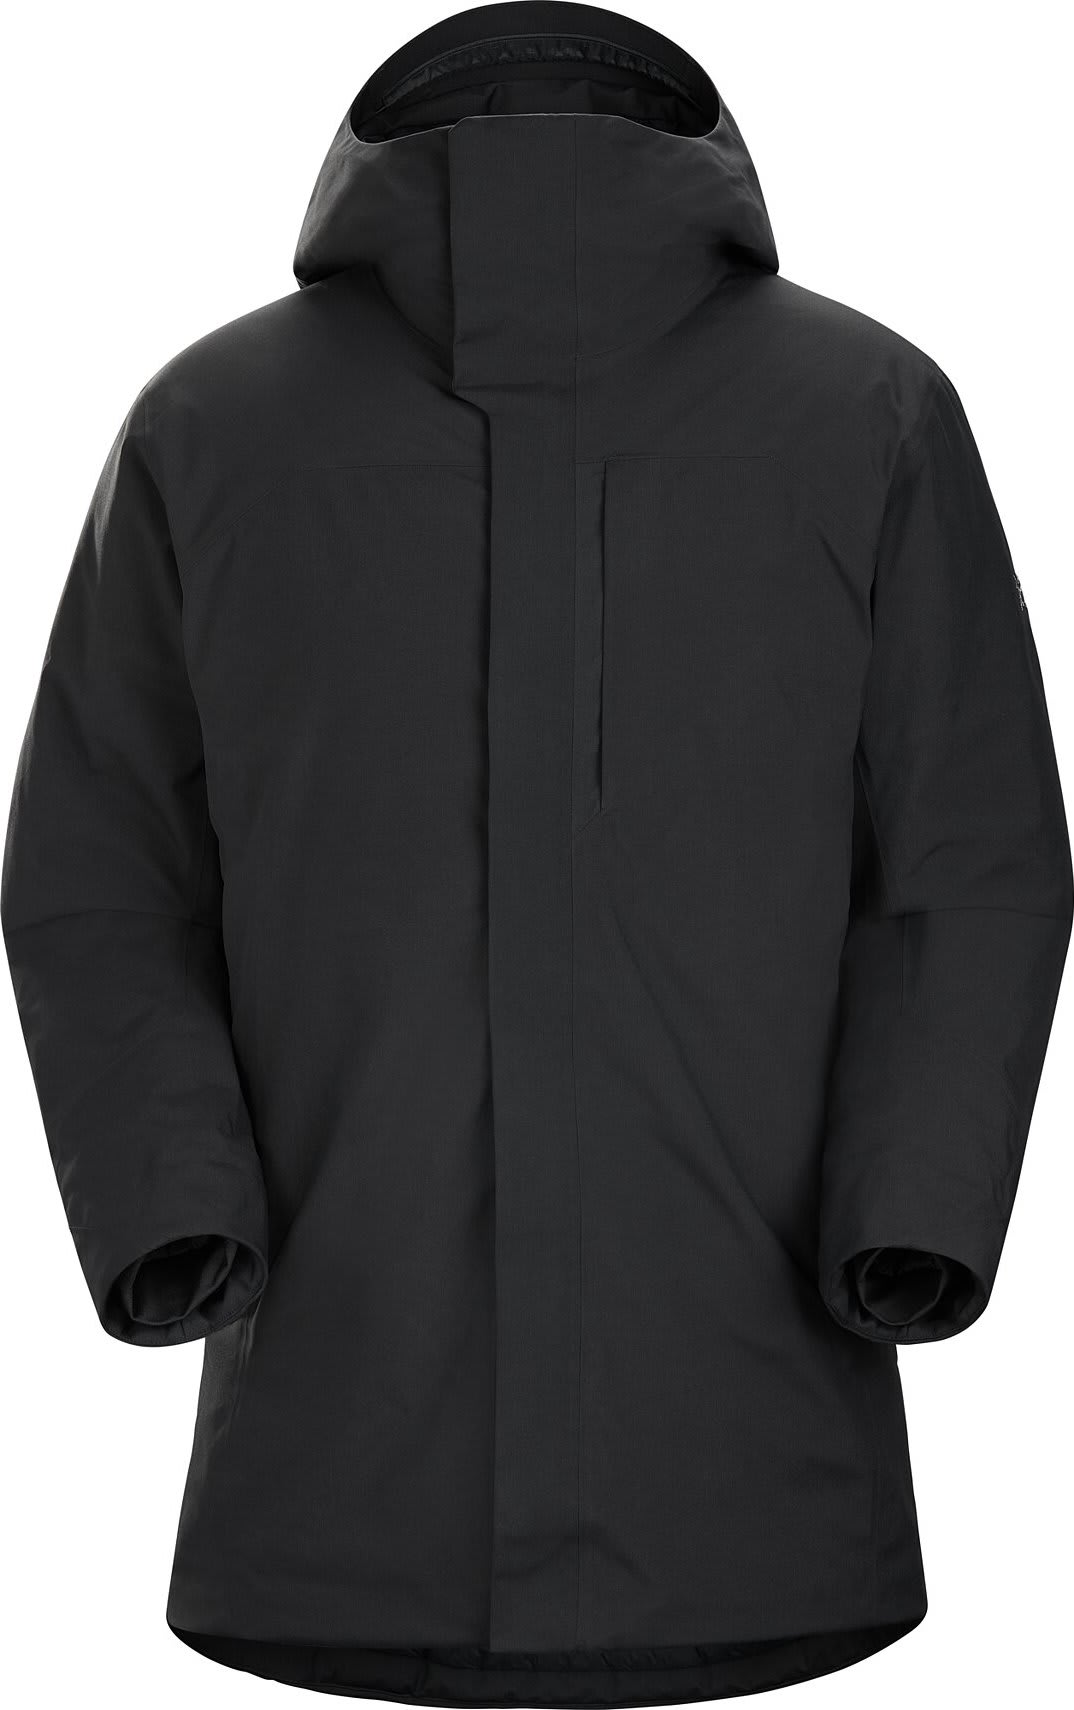 Buy Arc'teryx Men's Therme Parka from Outnorth